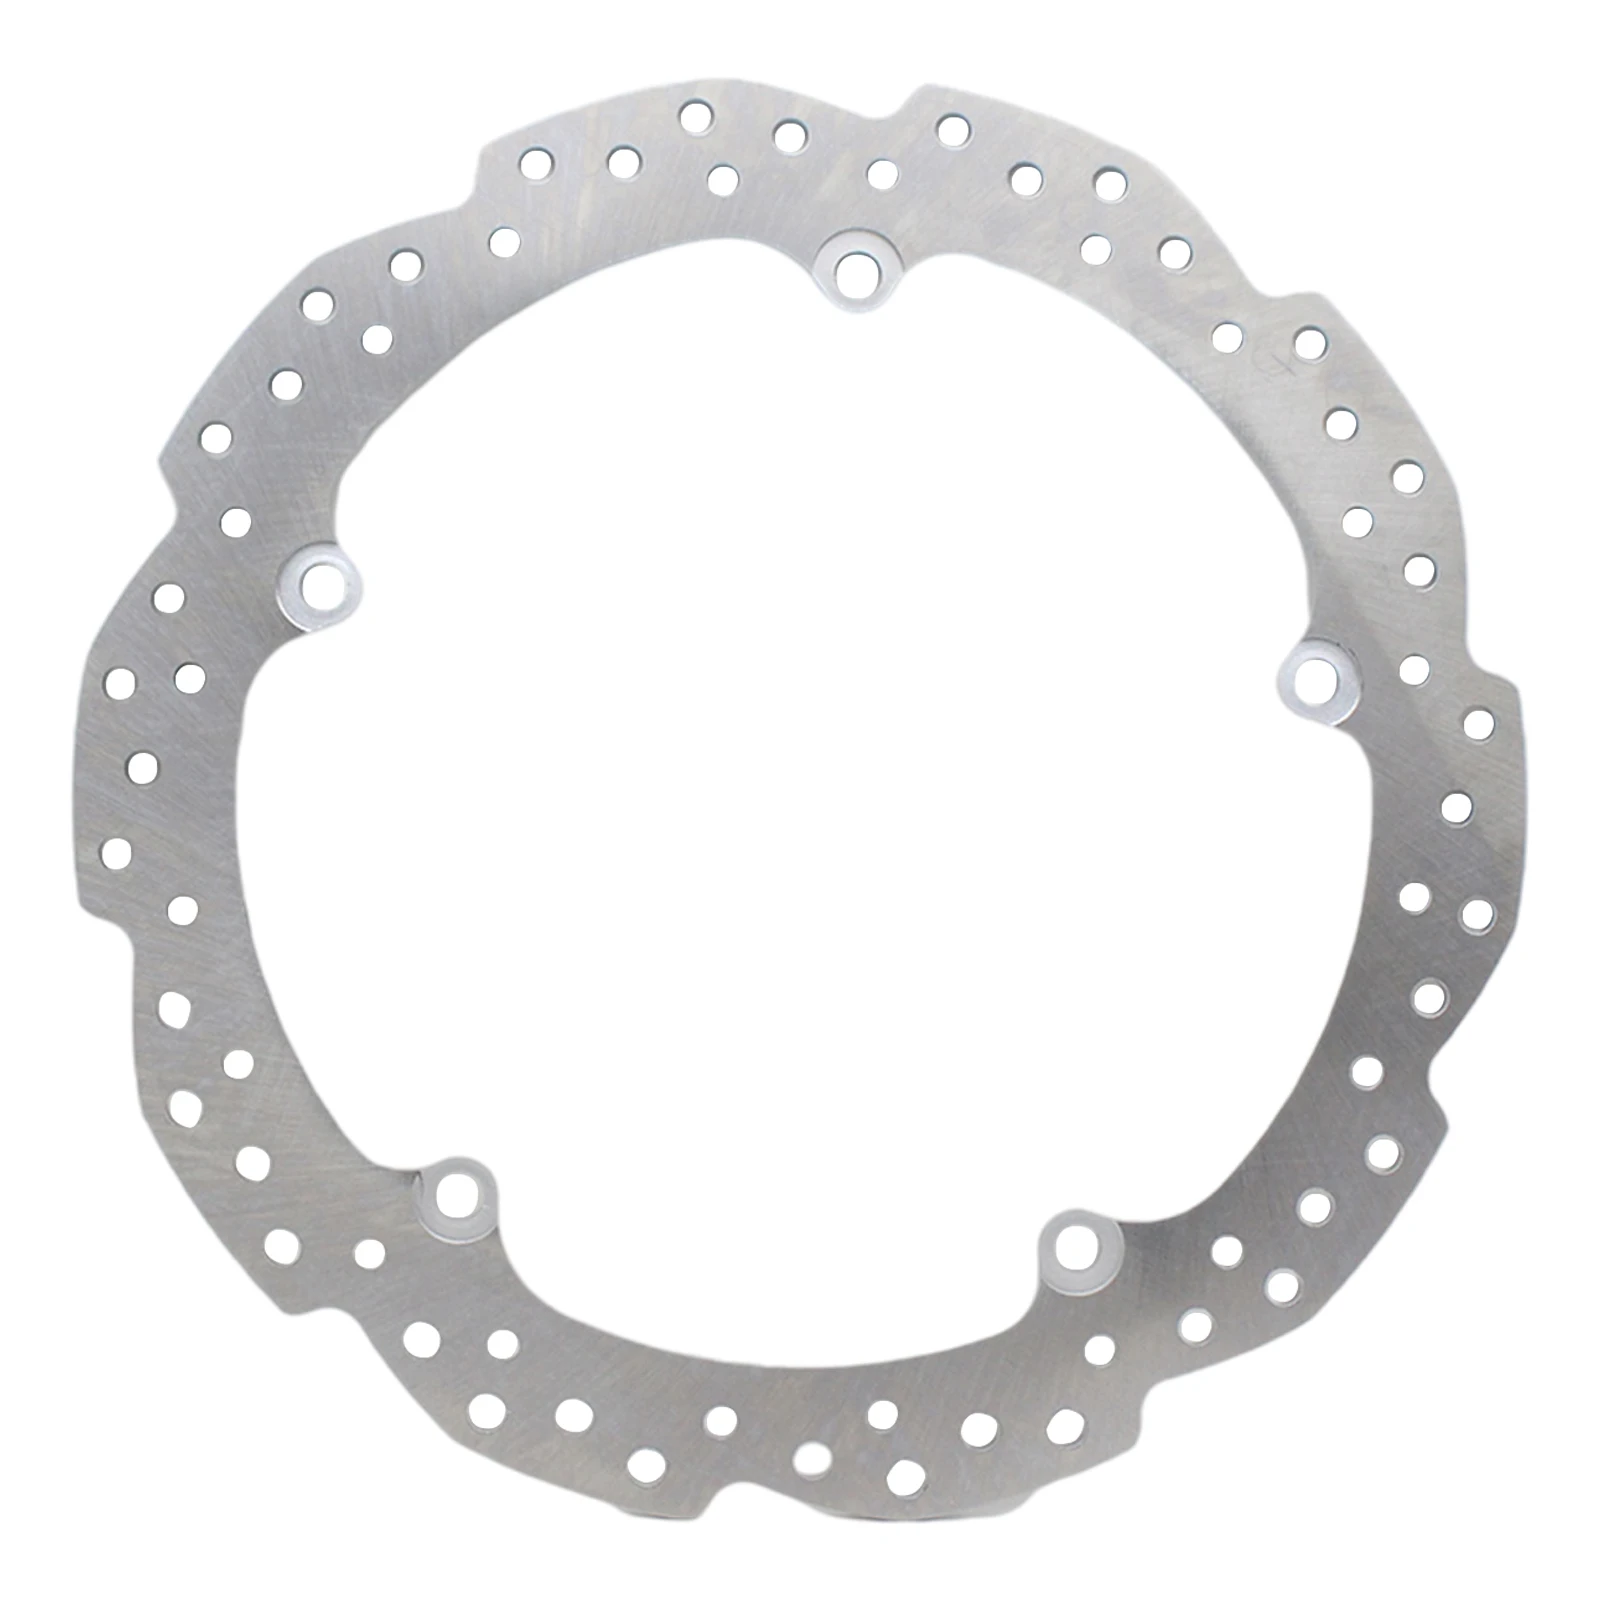 Front Brake Disc Rotor Durable ,Silver ,Replacement Fit for /S 12-2013 Moulding  NC750S/x 14-2015 Accessories D Ctx700